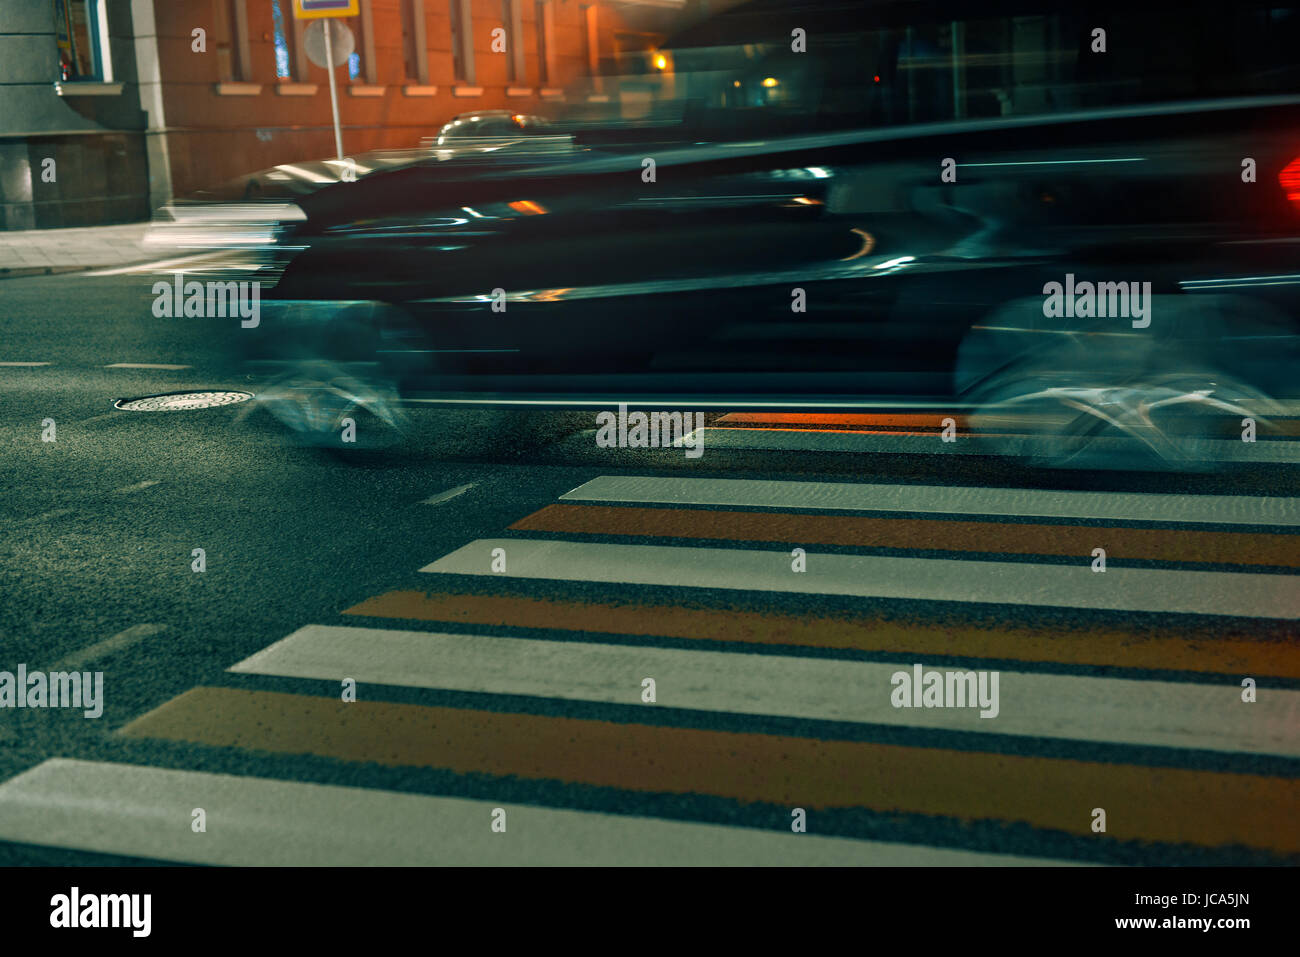 Crosswalk in city with fast moving blurred car at night. Pedestrian safety concept. Stock Photo